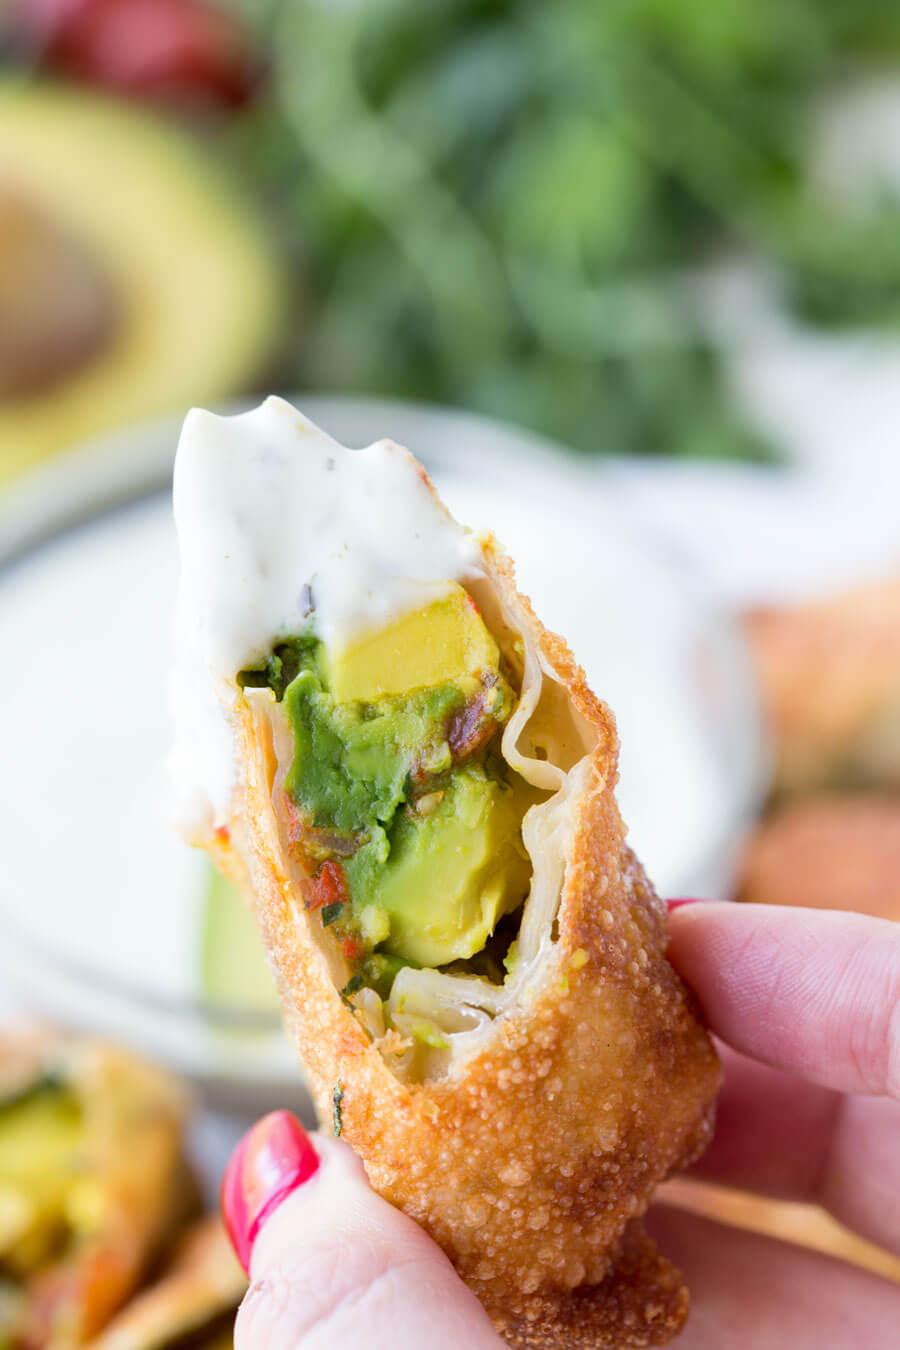 Avocado Eggrolls: Crunchy egg roll wrapper filled with chunks of California Avocados, cilantro, tomatoes, red onion, and roasted red peppers; dipped in a creamy avocado ranch dipping sauce!